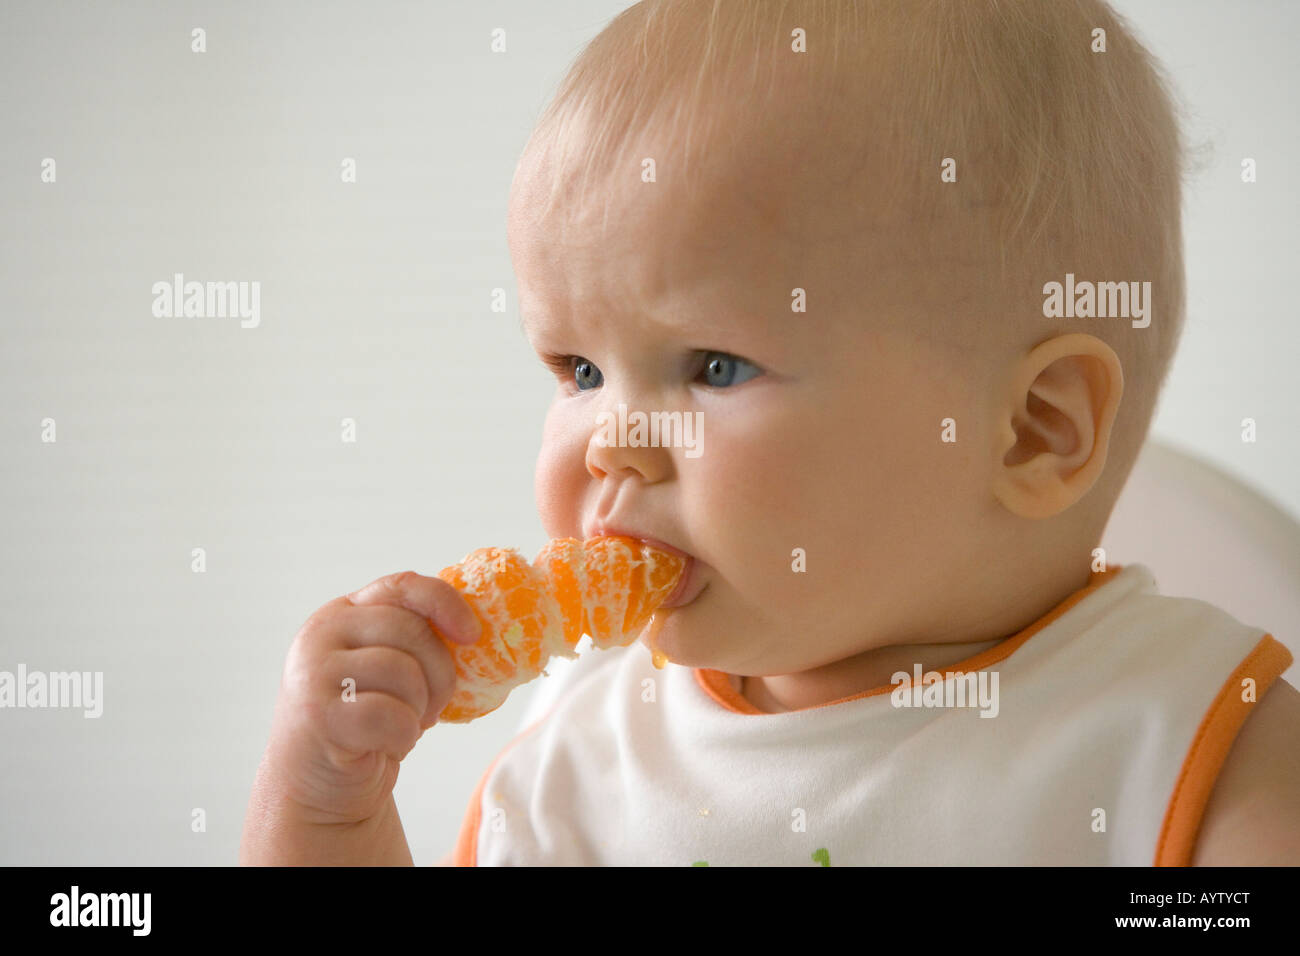 Toddler eating a mandarin by himself Stock Photo